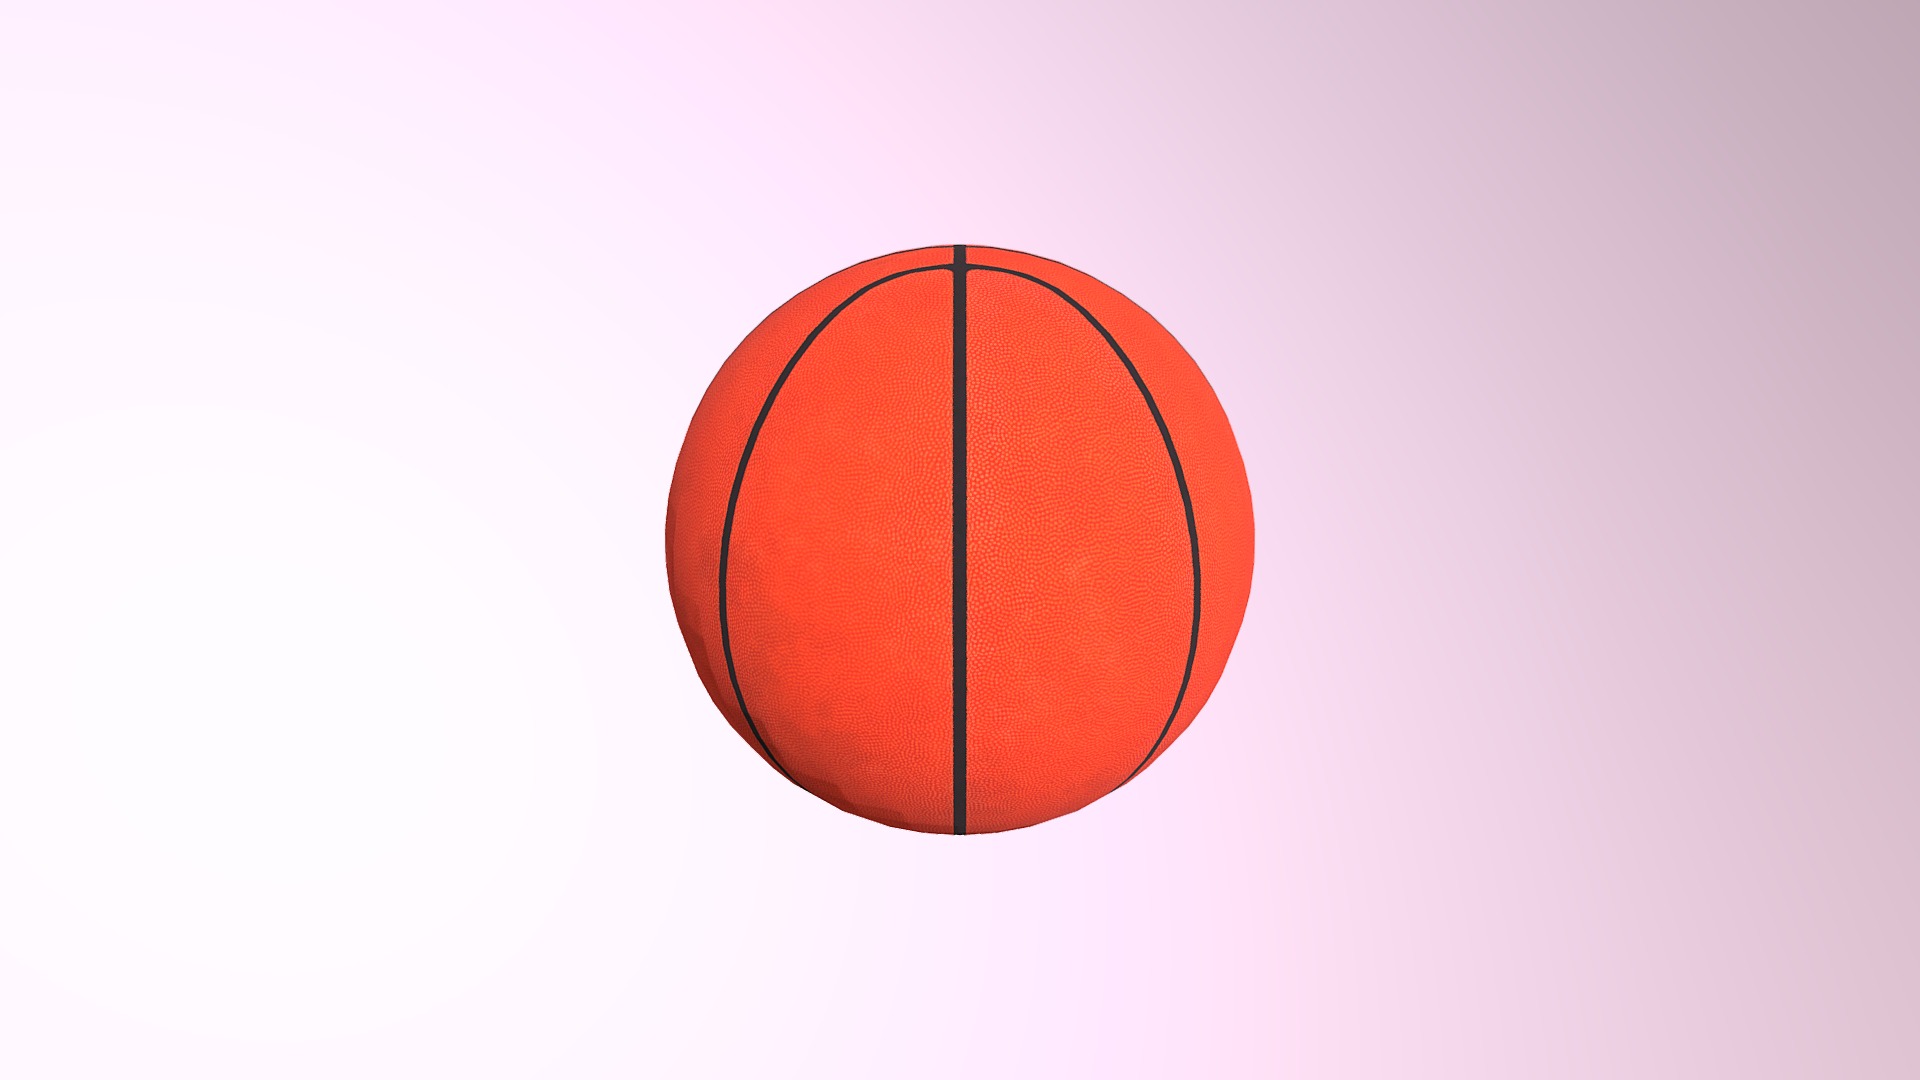 3D model Basketball .fbx for Games and Unity Game Engine - This is a 3D model of the Basketball .fbx for Games and Unity Game Engine. The 3D model is about a basketball on a white background.